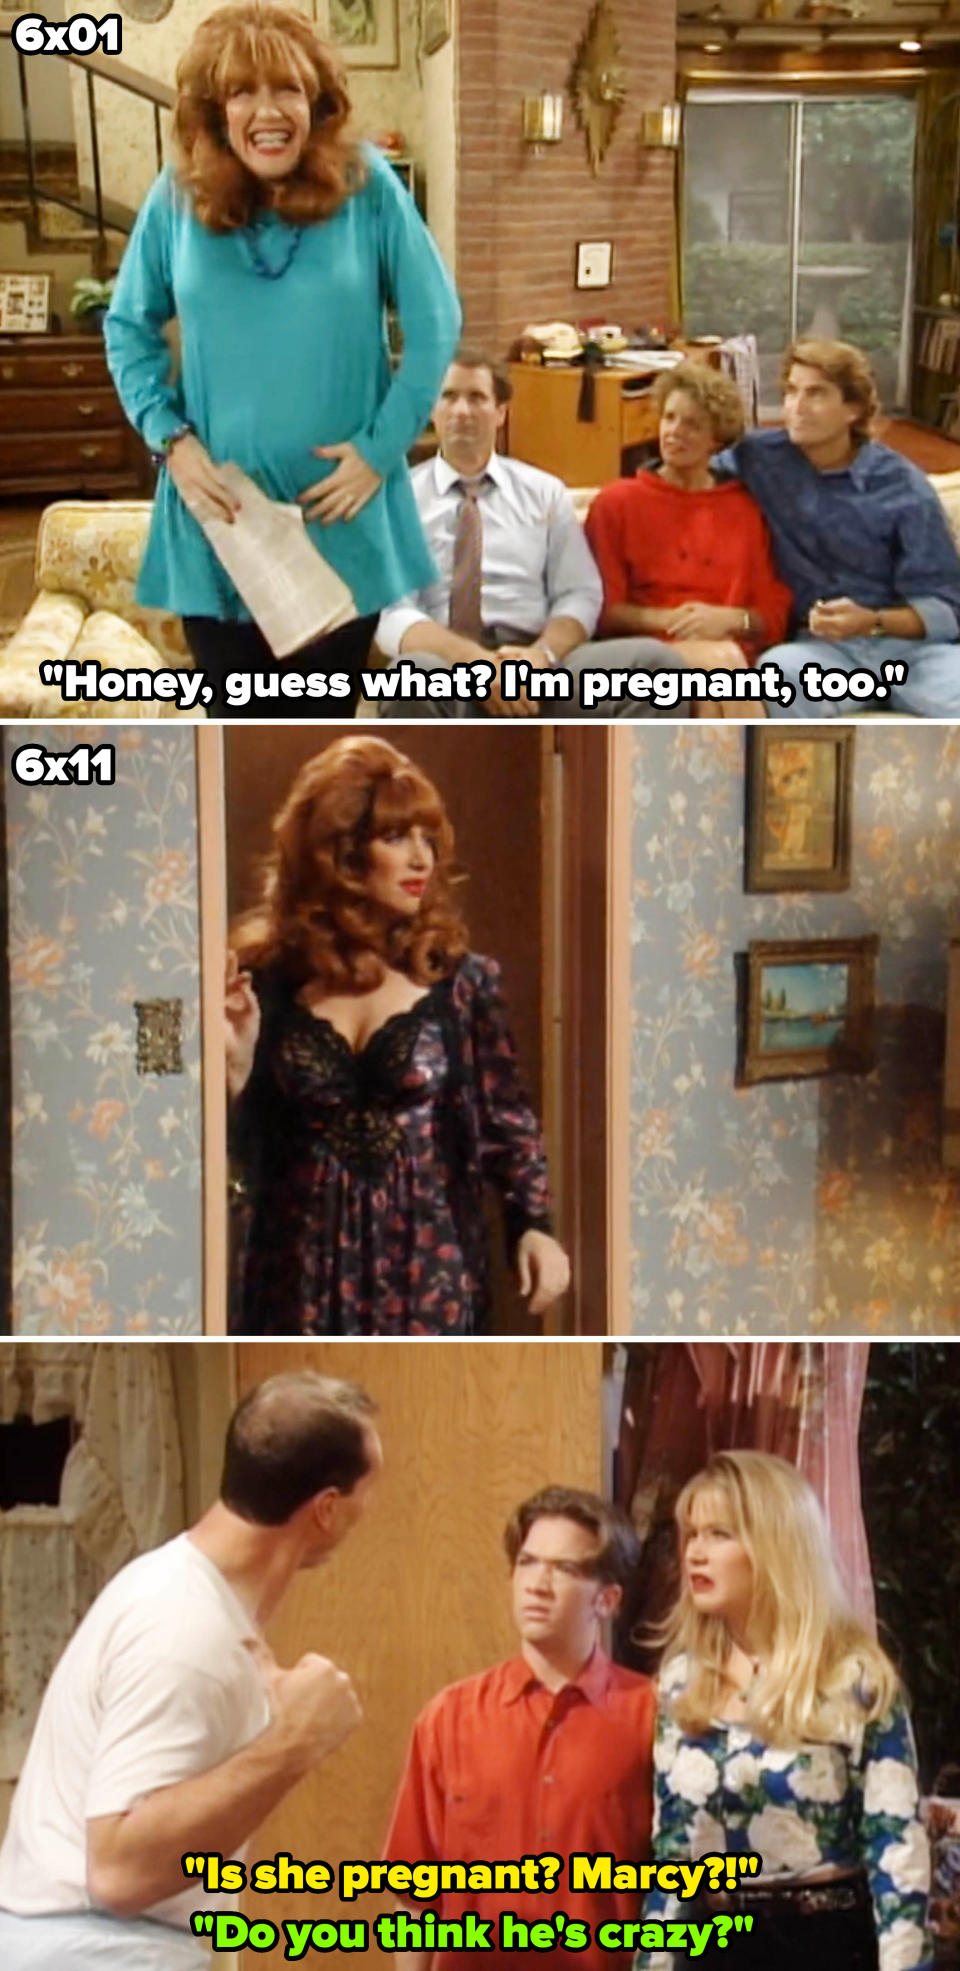 TV show "Married with Children" cast in different scenes, including characters Peg, Al, Kelly, and Bud Bundy